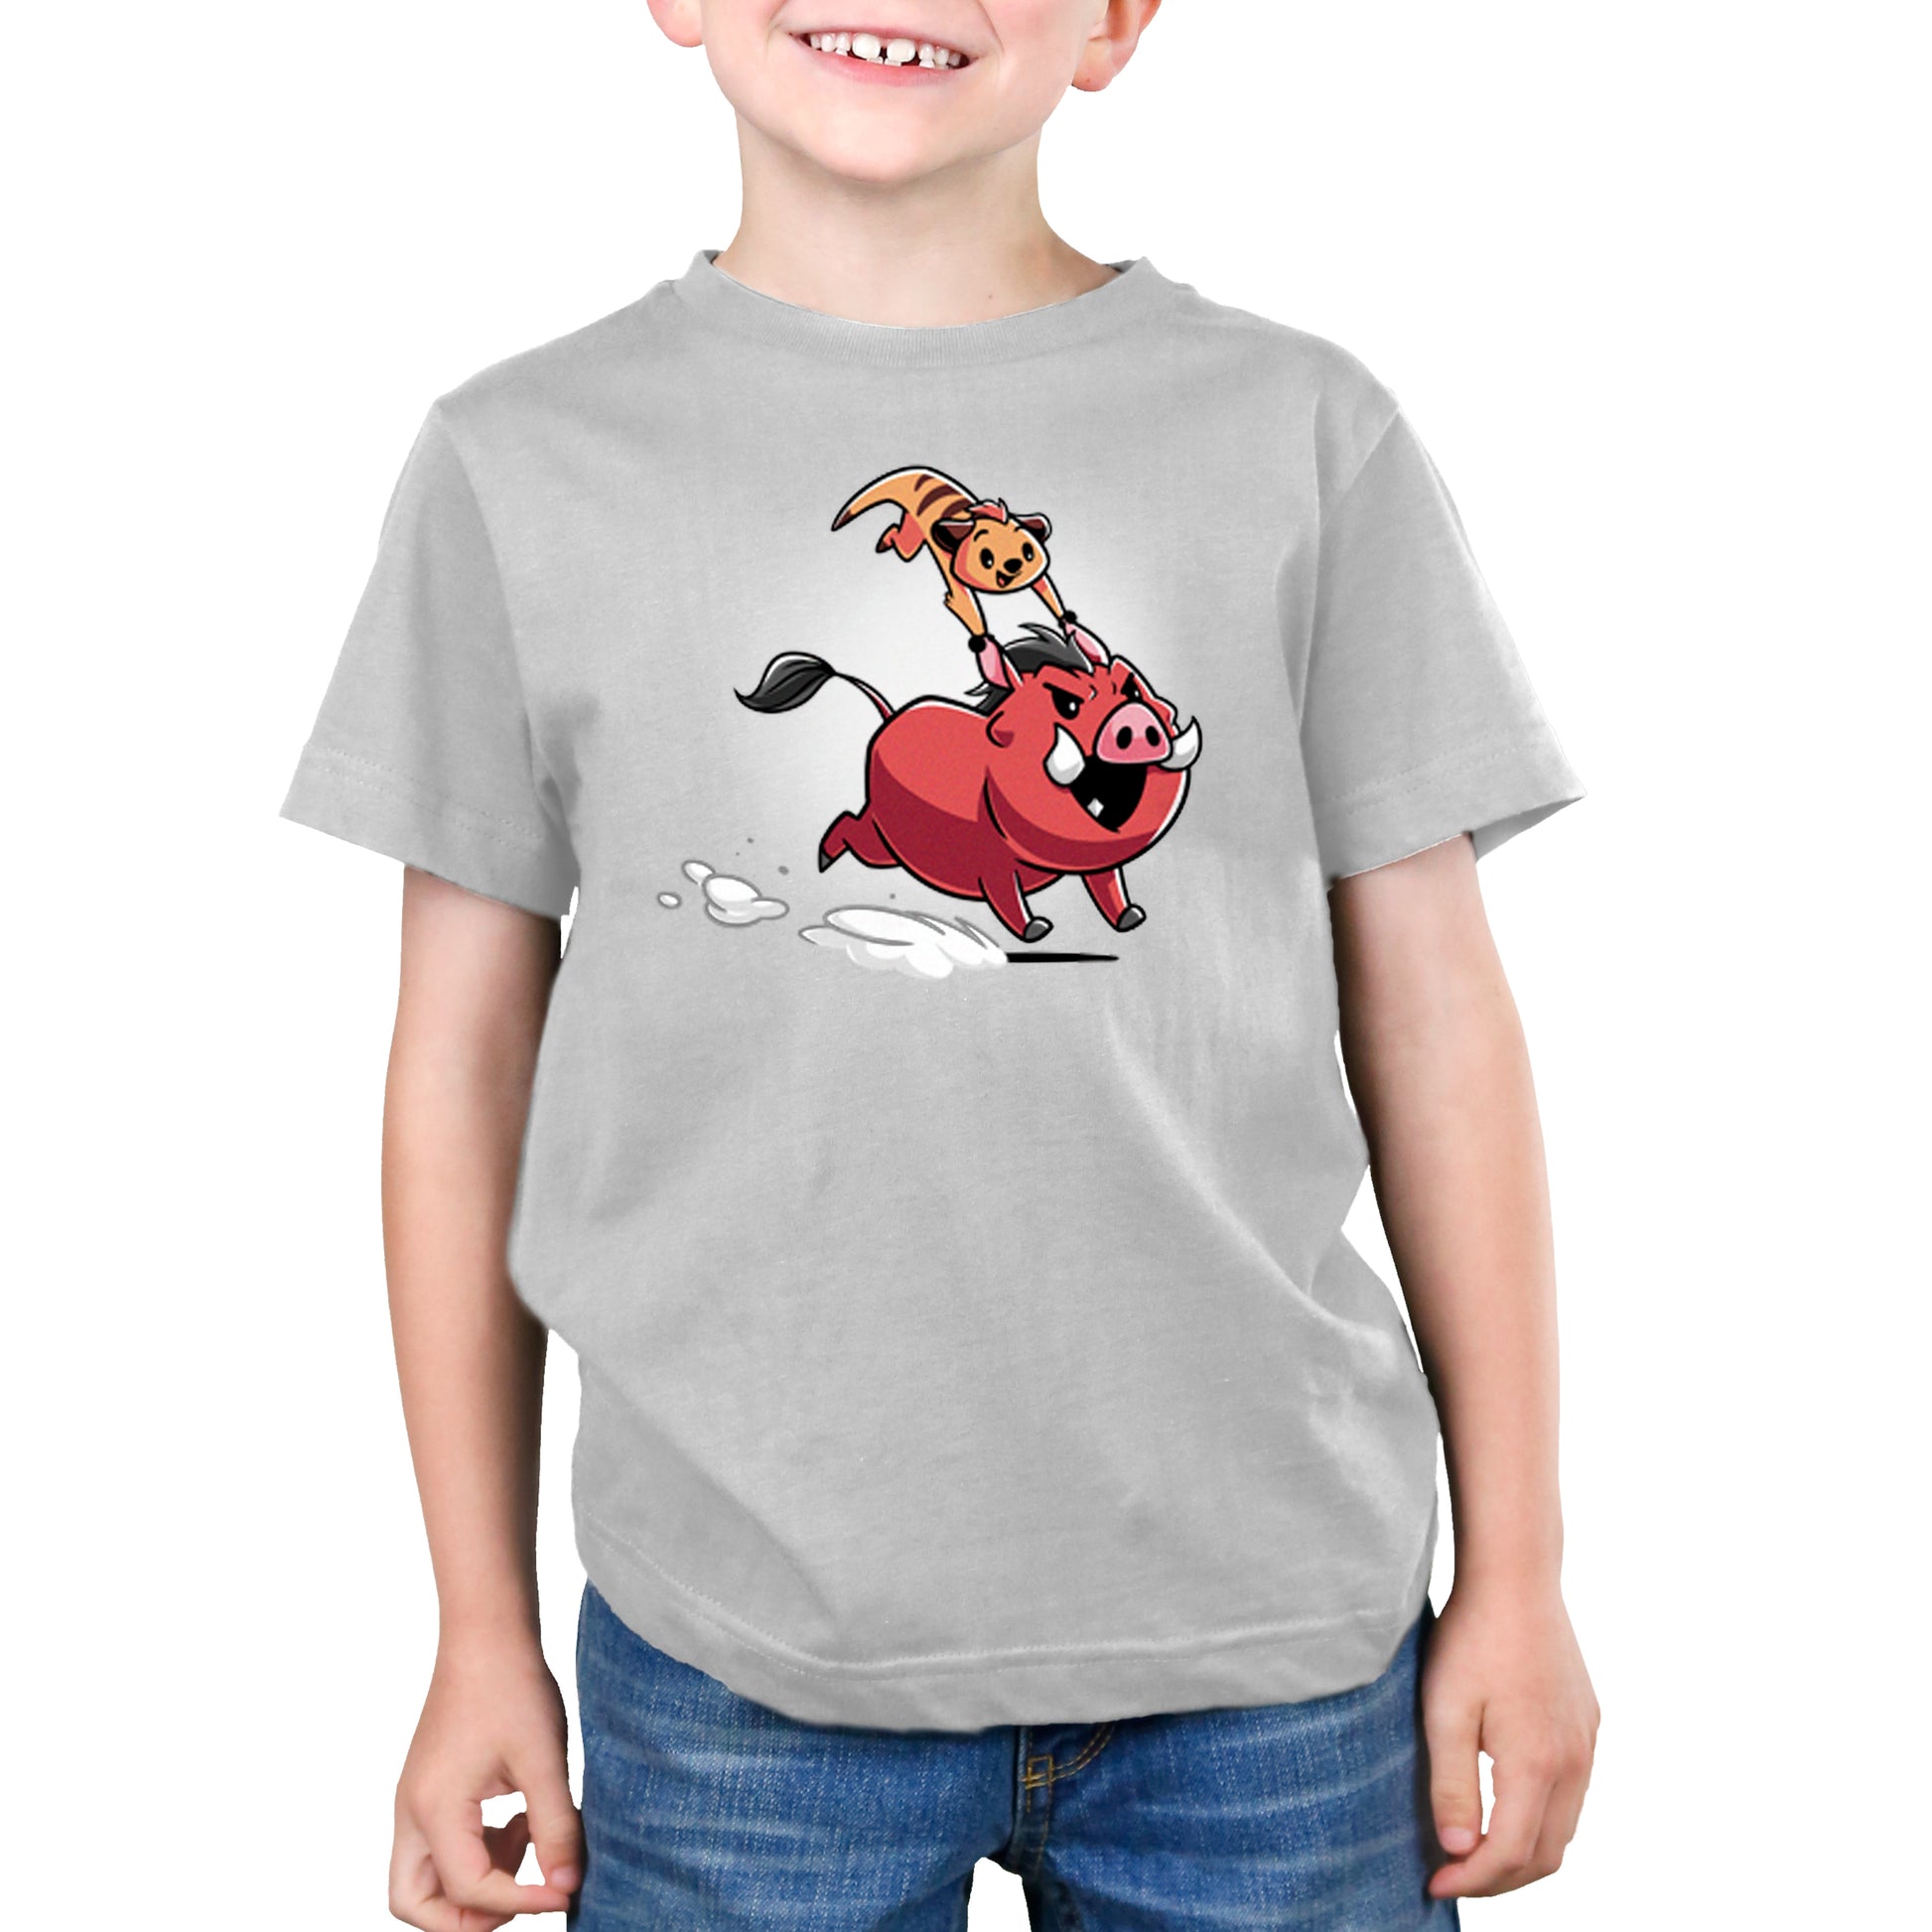 A young boy wearing an officially licensed Timon & Pumbaa t-shirt from Disney.